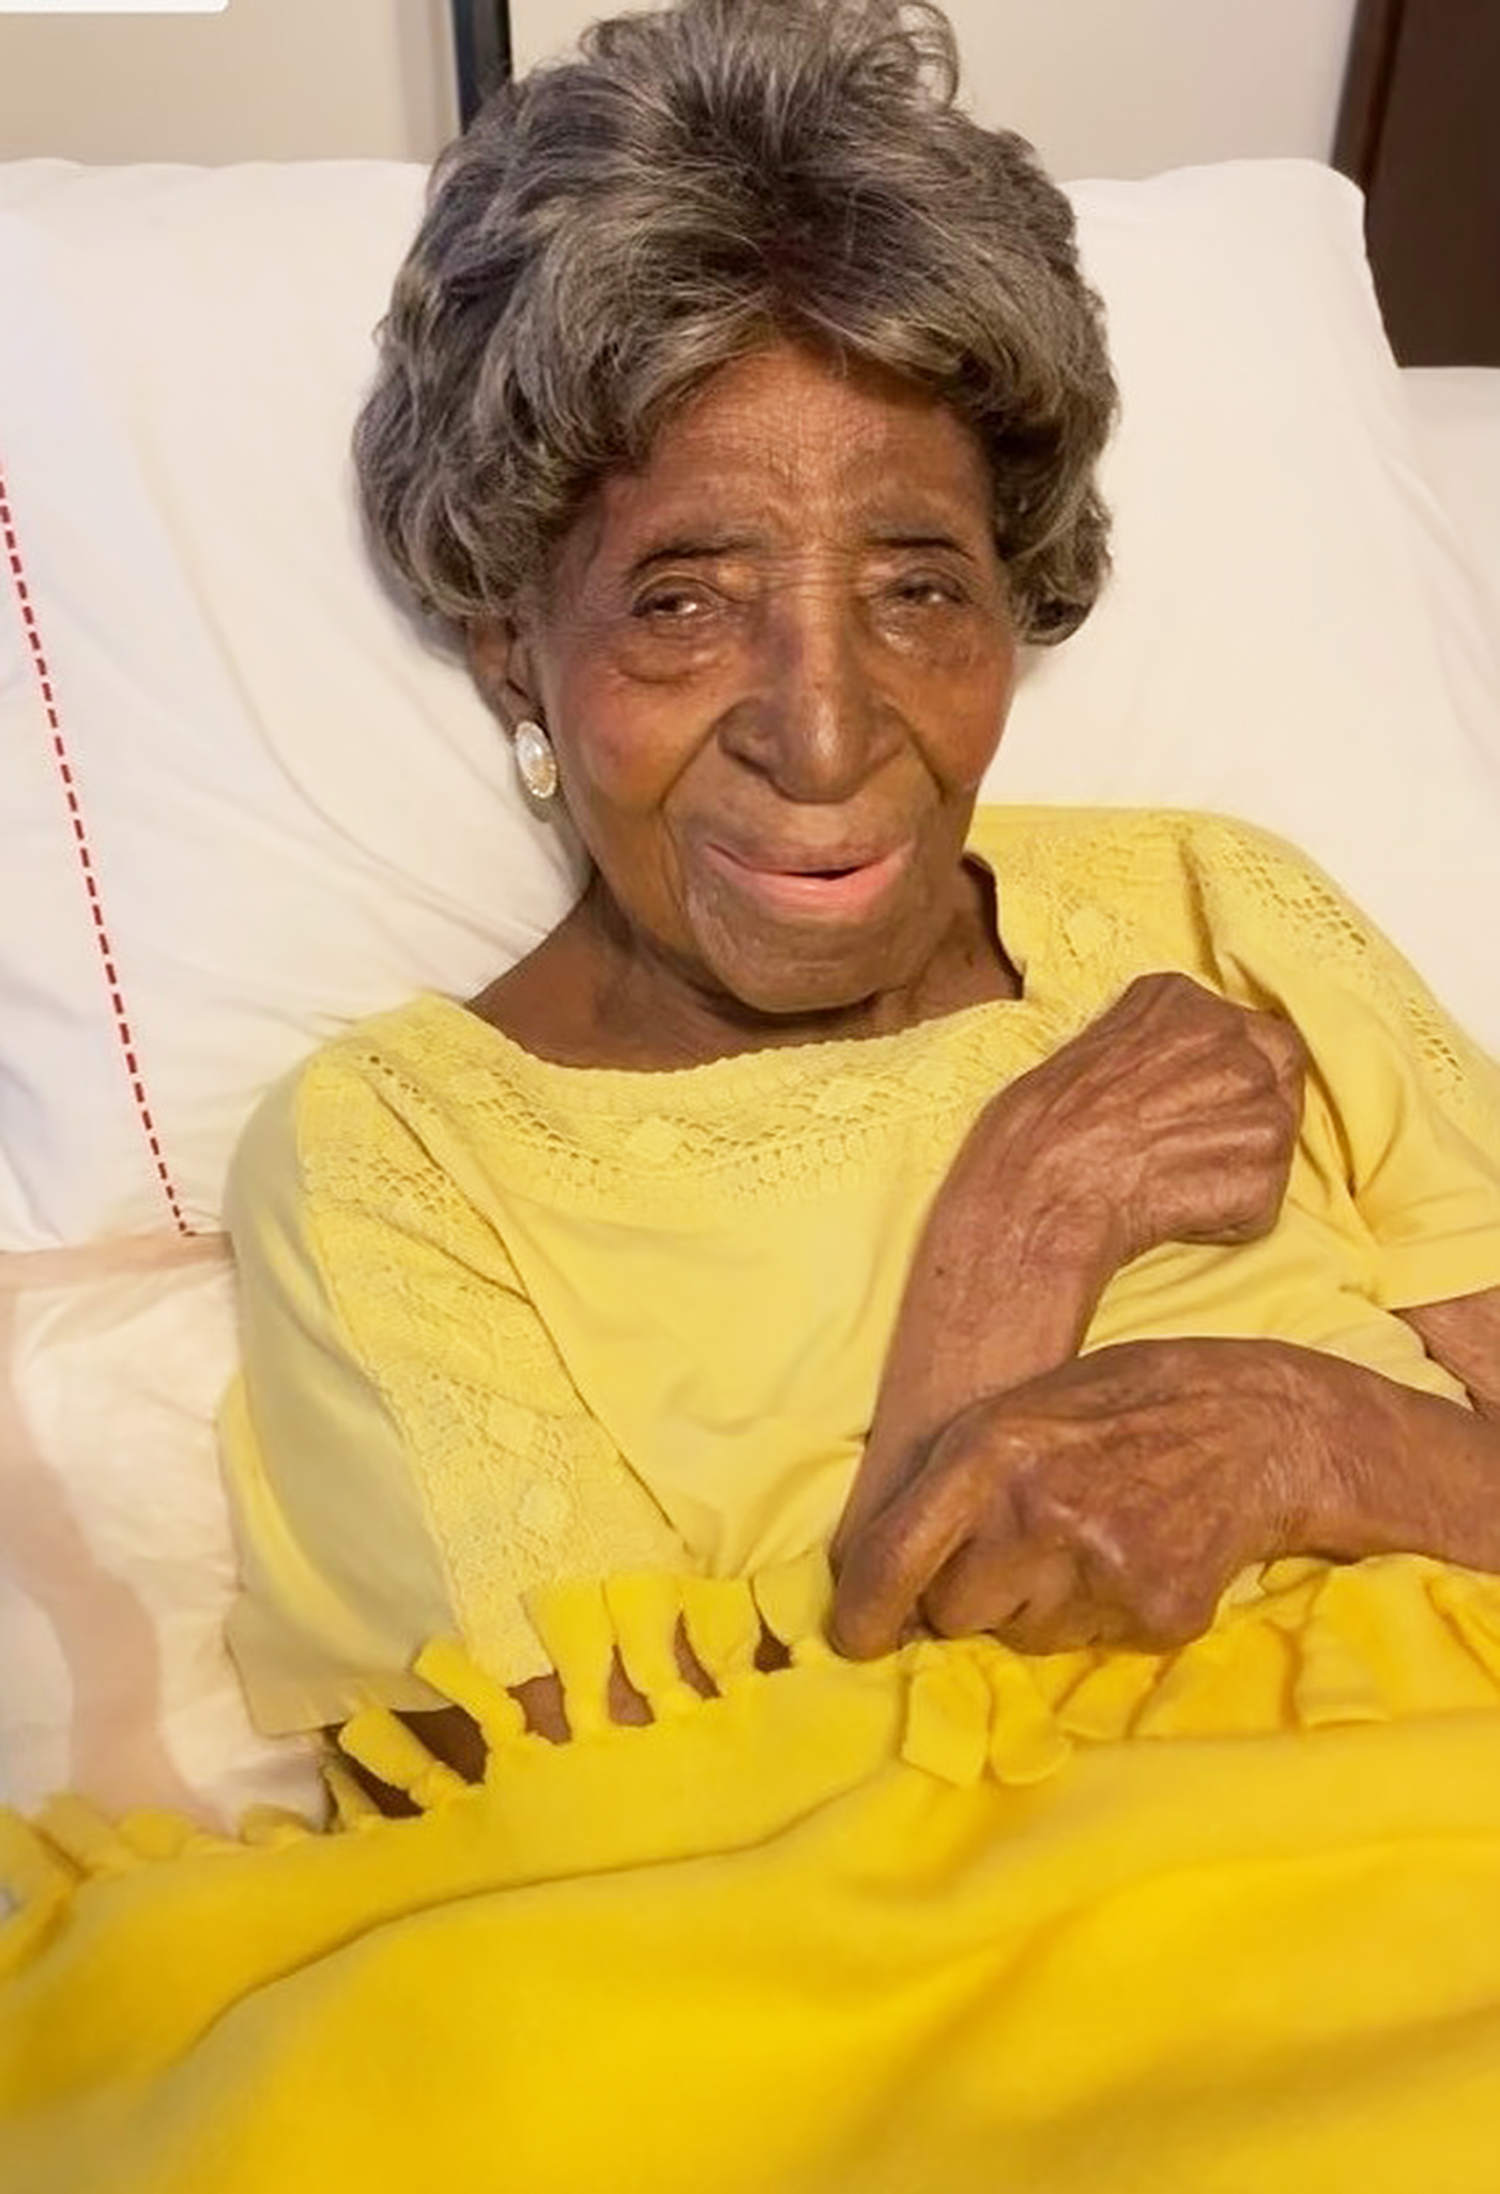 America's oldest living person, at 114, may also be the fifth-oldest person on Earth